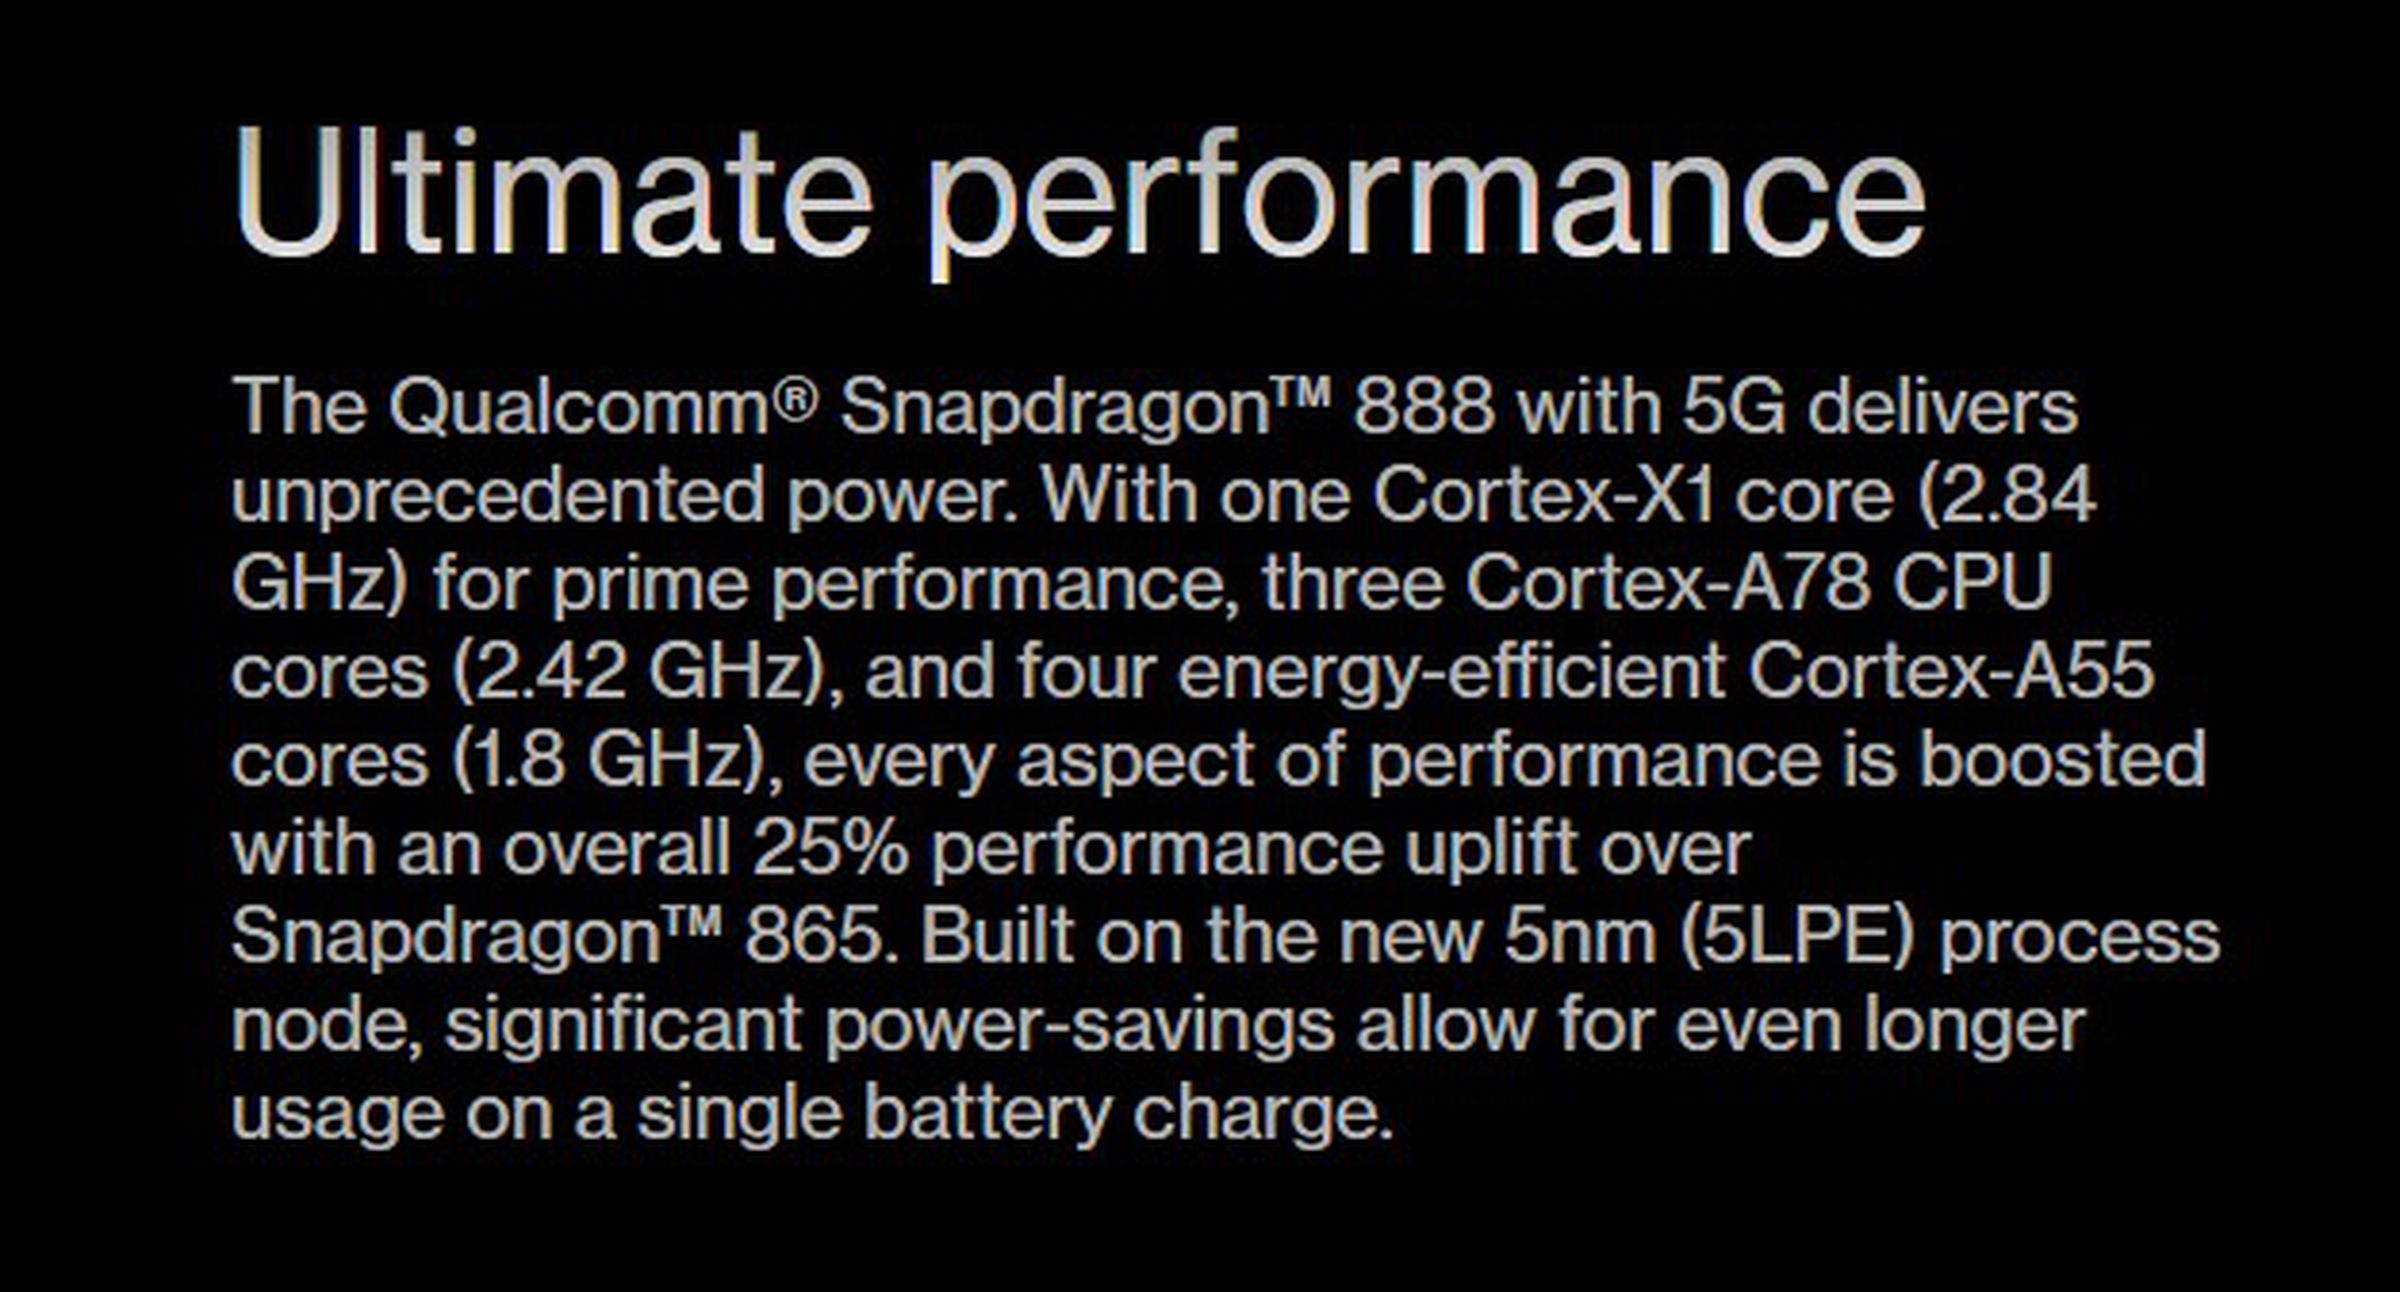 The OnePlus 9 Pro promises “ultimate performance” from its new Snapdragon chip.